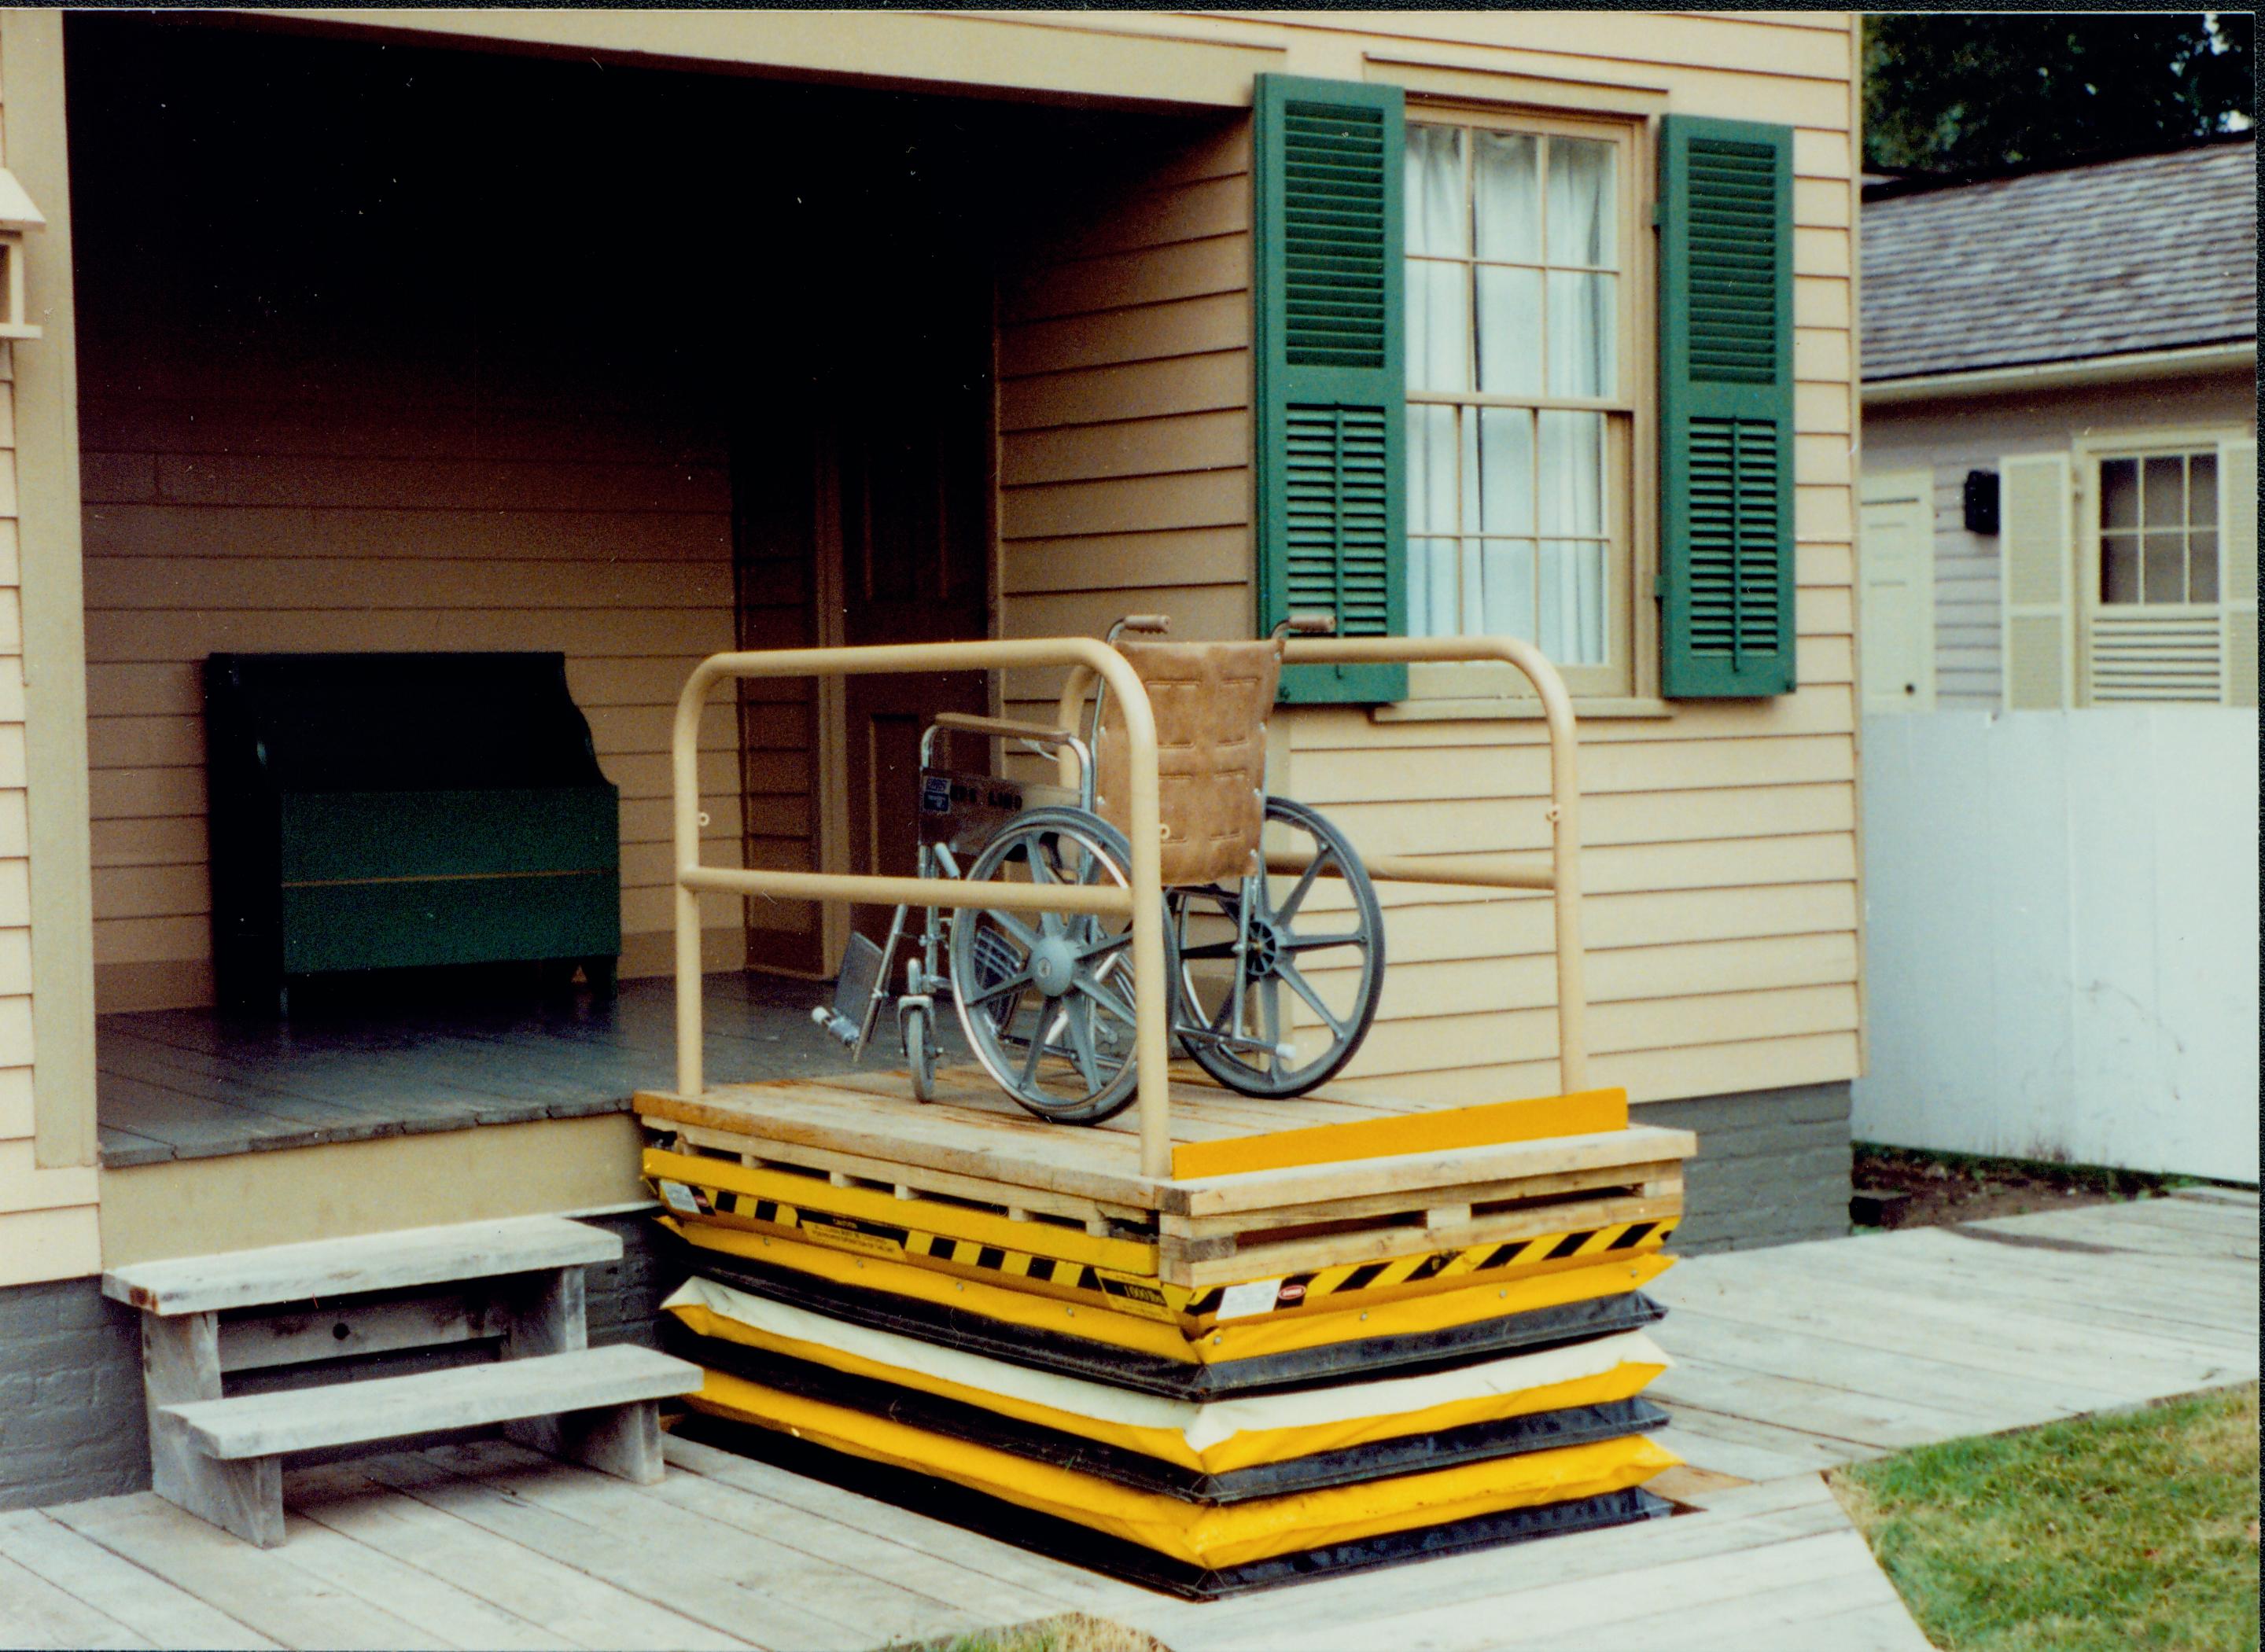 Lincoln Home wheelchair lift at full height, with empty wheelchair. Corneau house in background. Photographer facing north west.